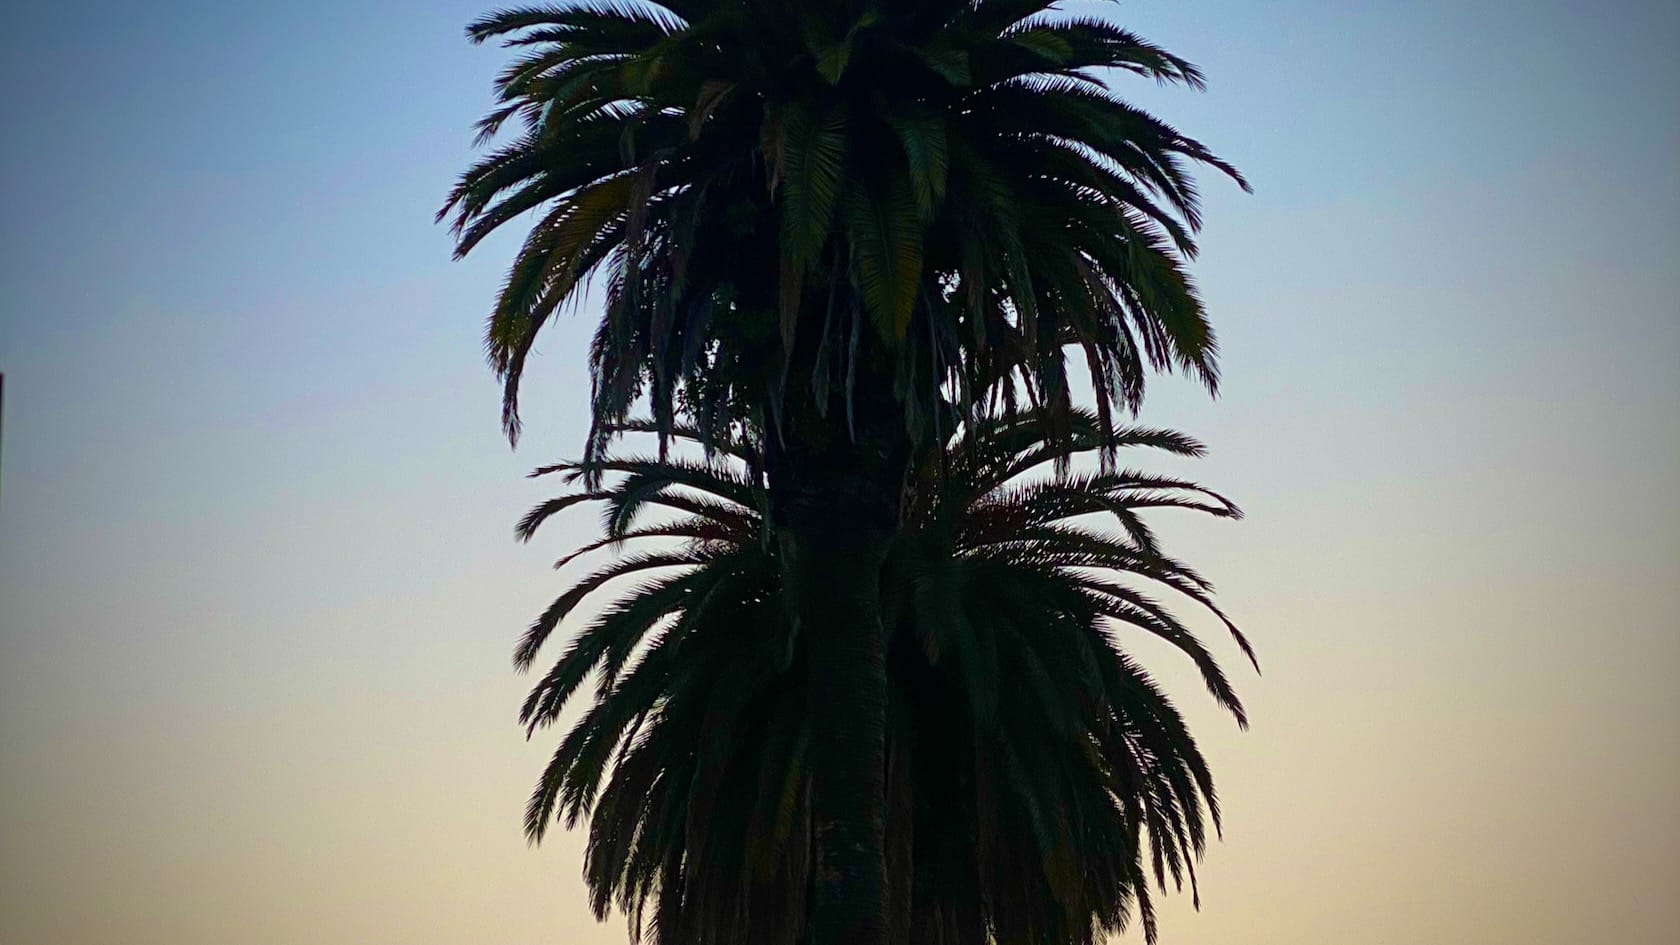 A silhouette of a palm tree in front of a sunset